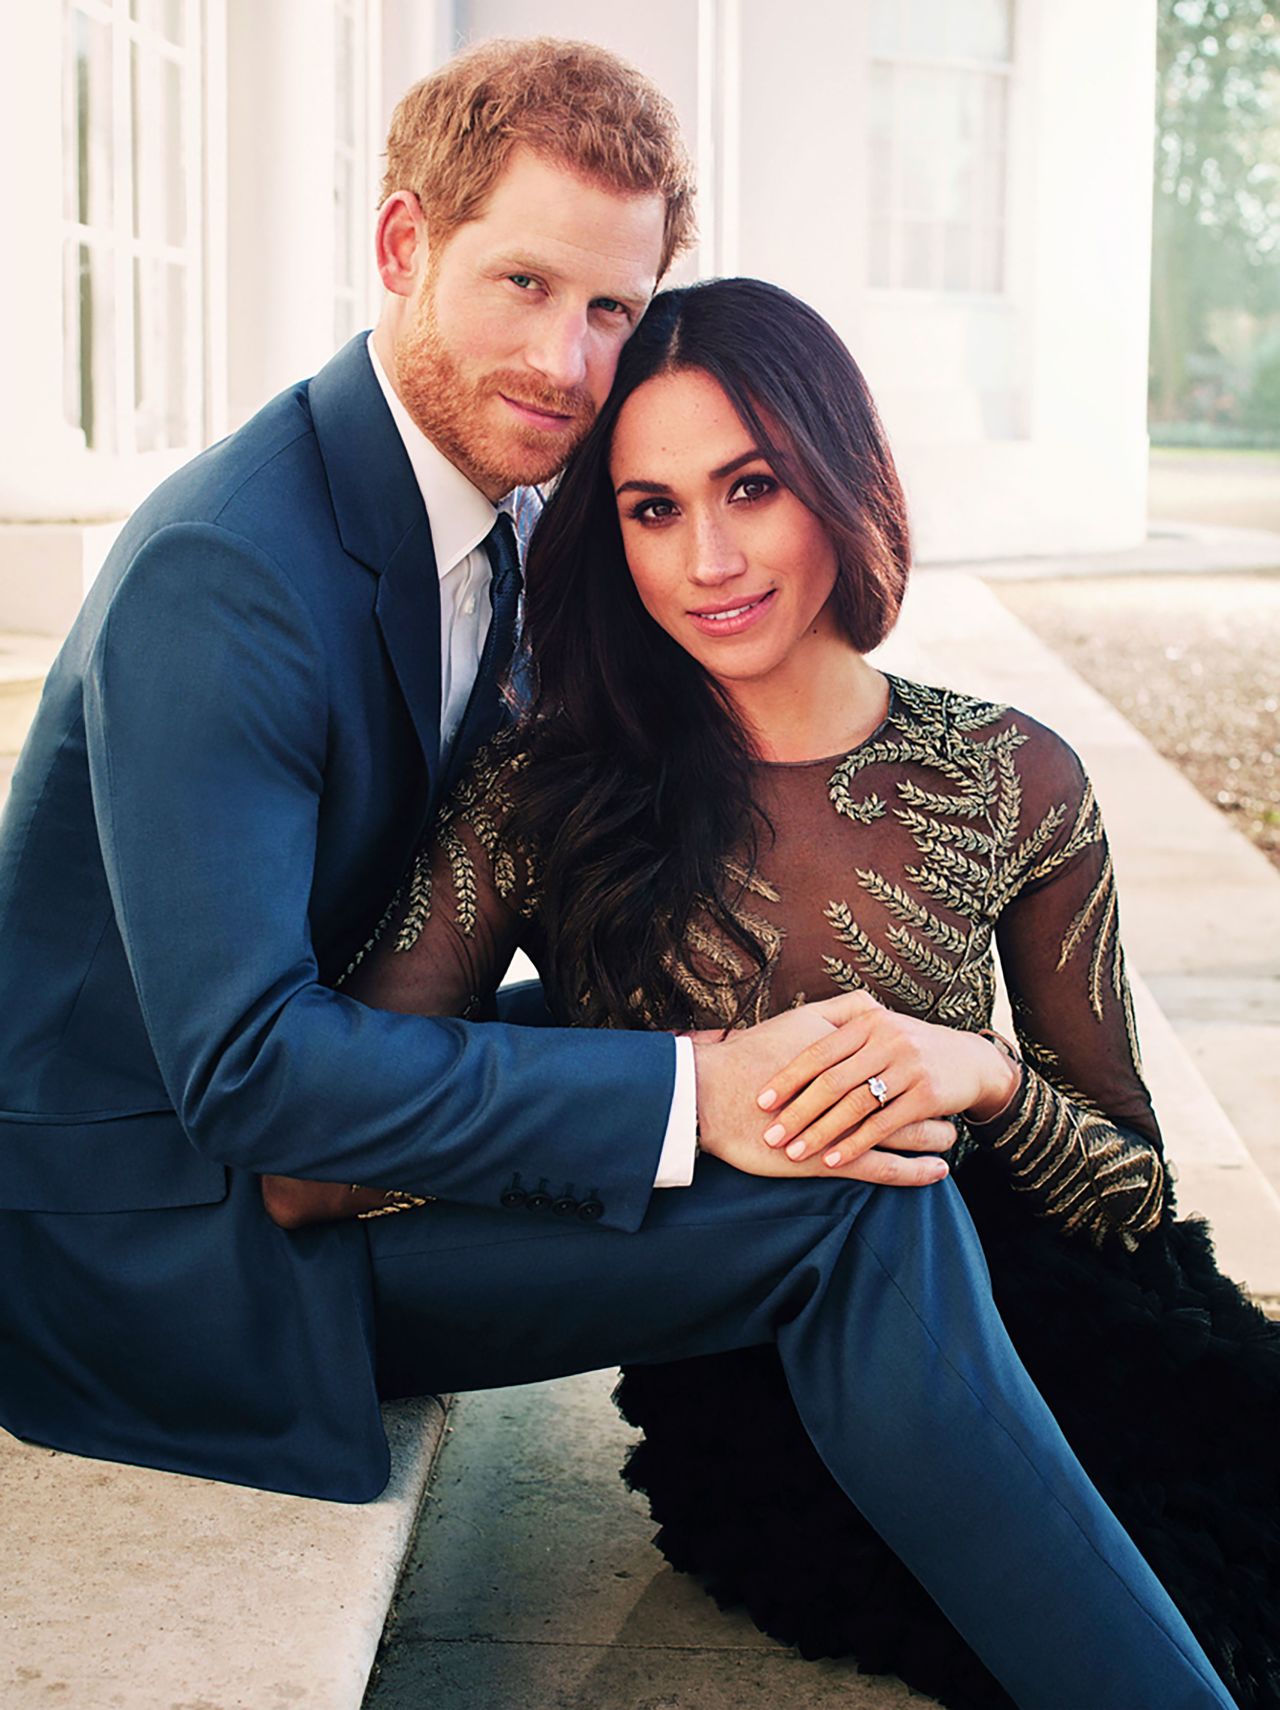 This engagement photo <a href="https://www.cnn.com/2017/12/21/europe/prince-harry-meghan-markle-official-photos-intl/index.html" target="_blank">was released by Kensington Palace</a>.